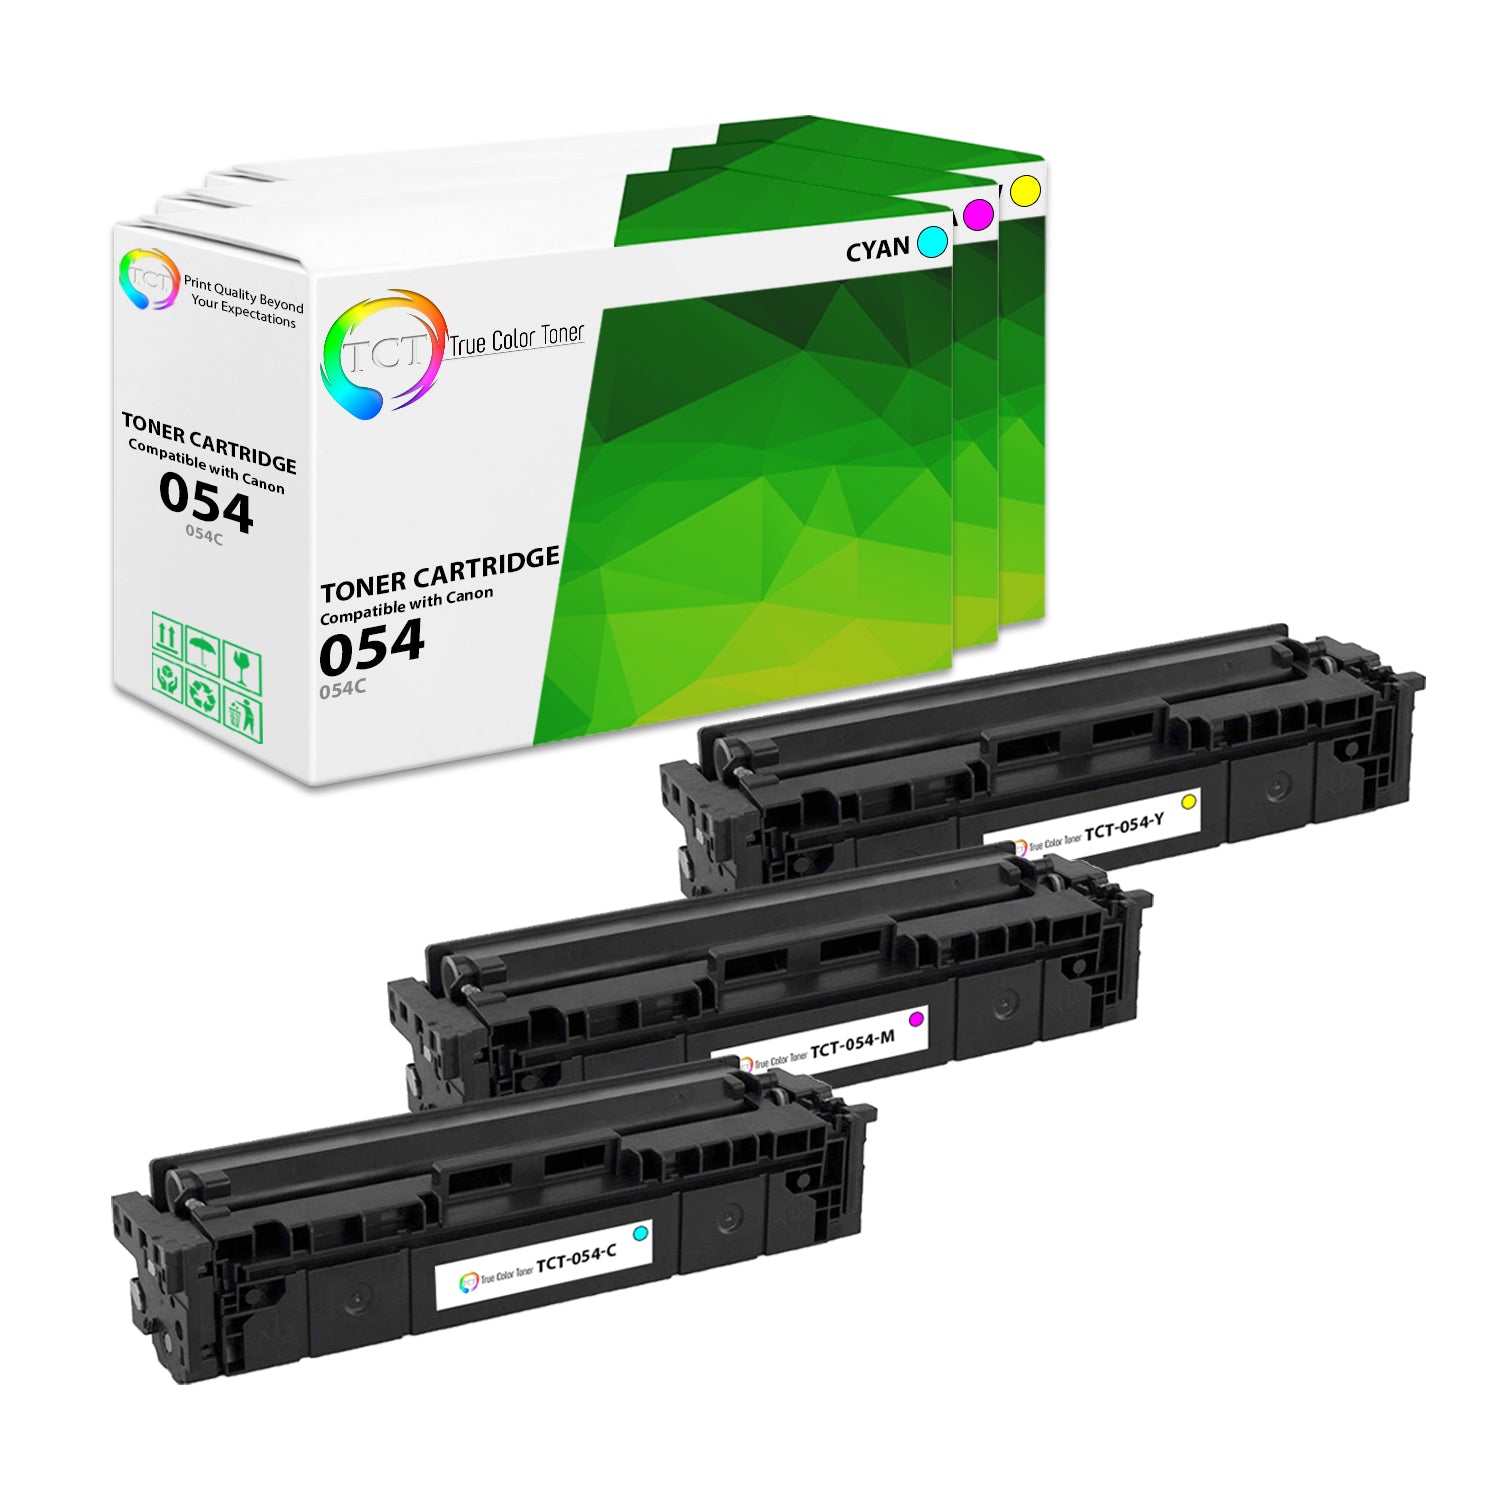 TCT Compatible Toner Cartridge Replacement for the Canon 054 Series - 3 Pack (C, M, Y)